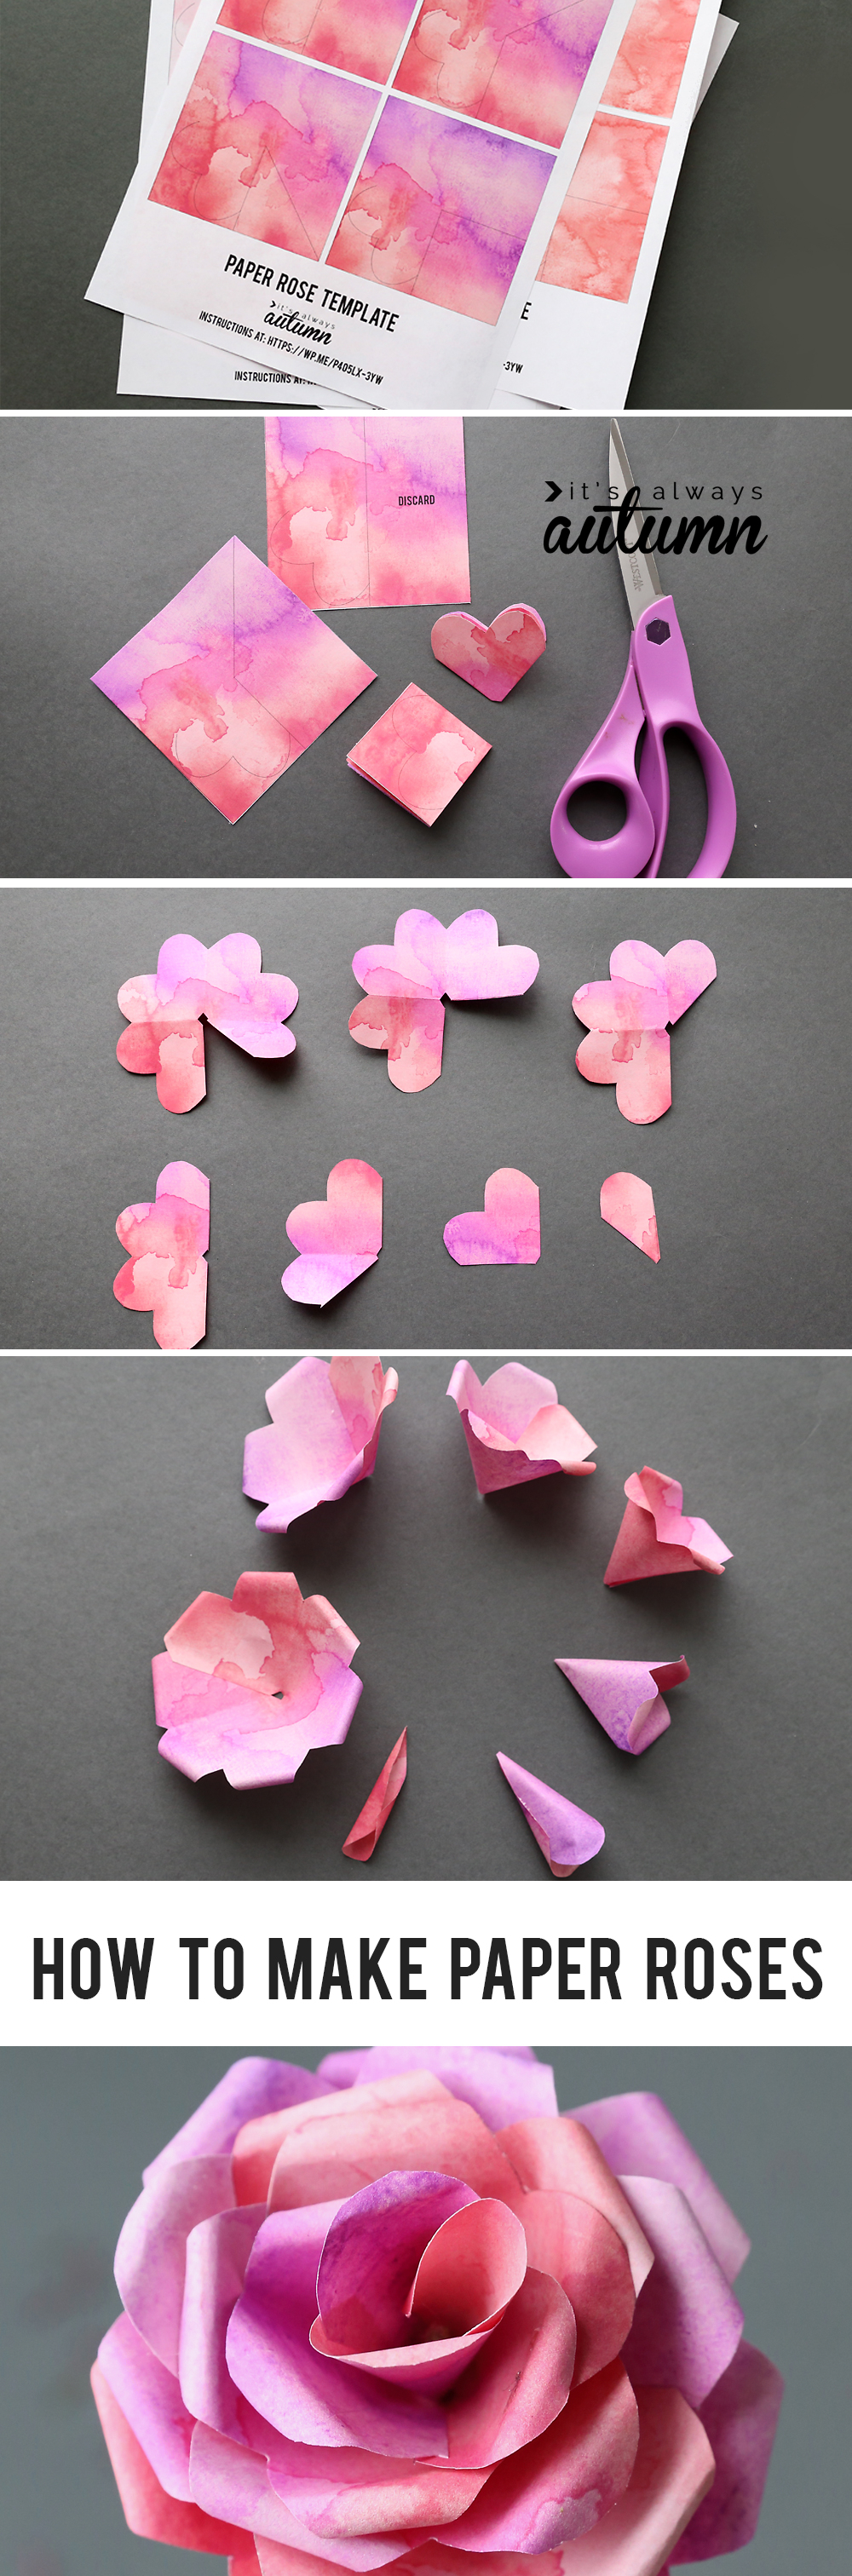 How To Make An Origami Flower Easy Make Gorgeous Paper Roses With This Free Paper Rose Template Its